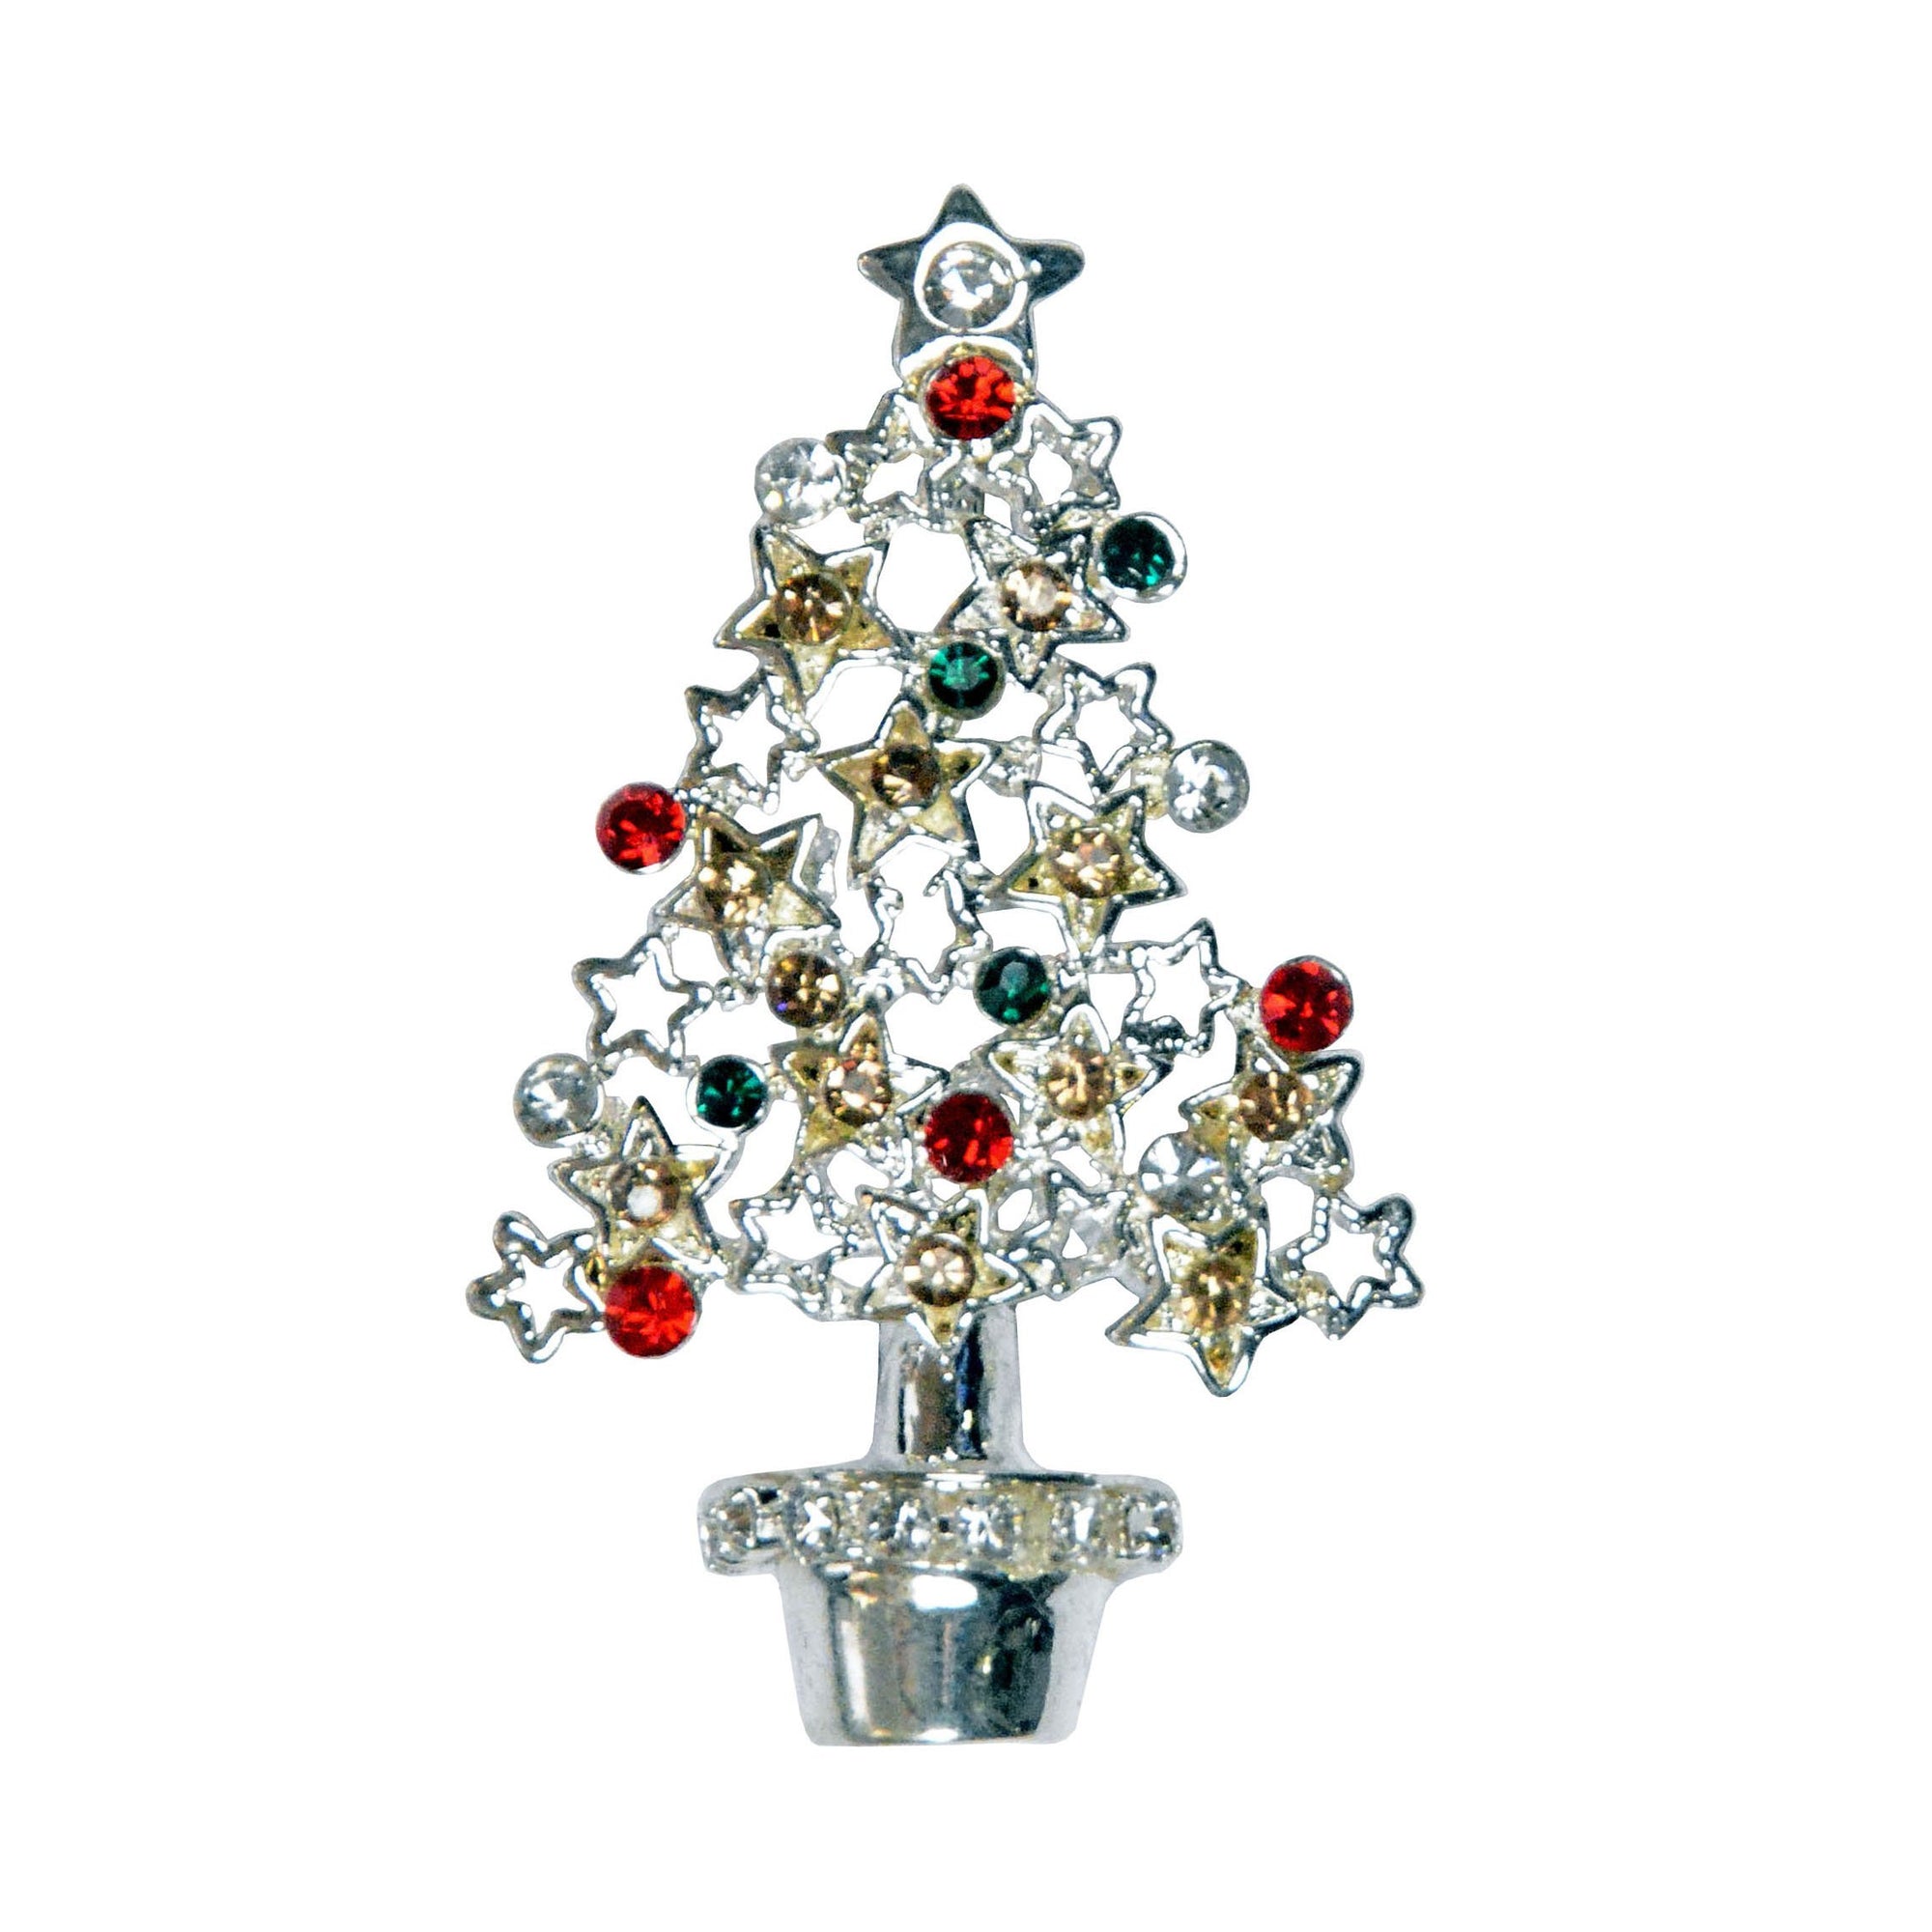 Christmas Tree Pin |Rhinstone Brooch with Red, Green and Gold decorative crystal Bulbs | Pandemoium Seattle 